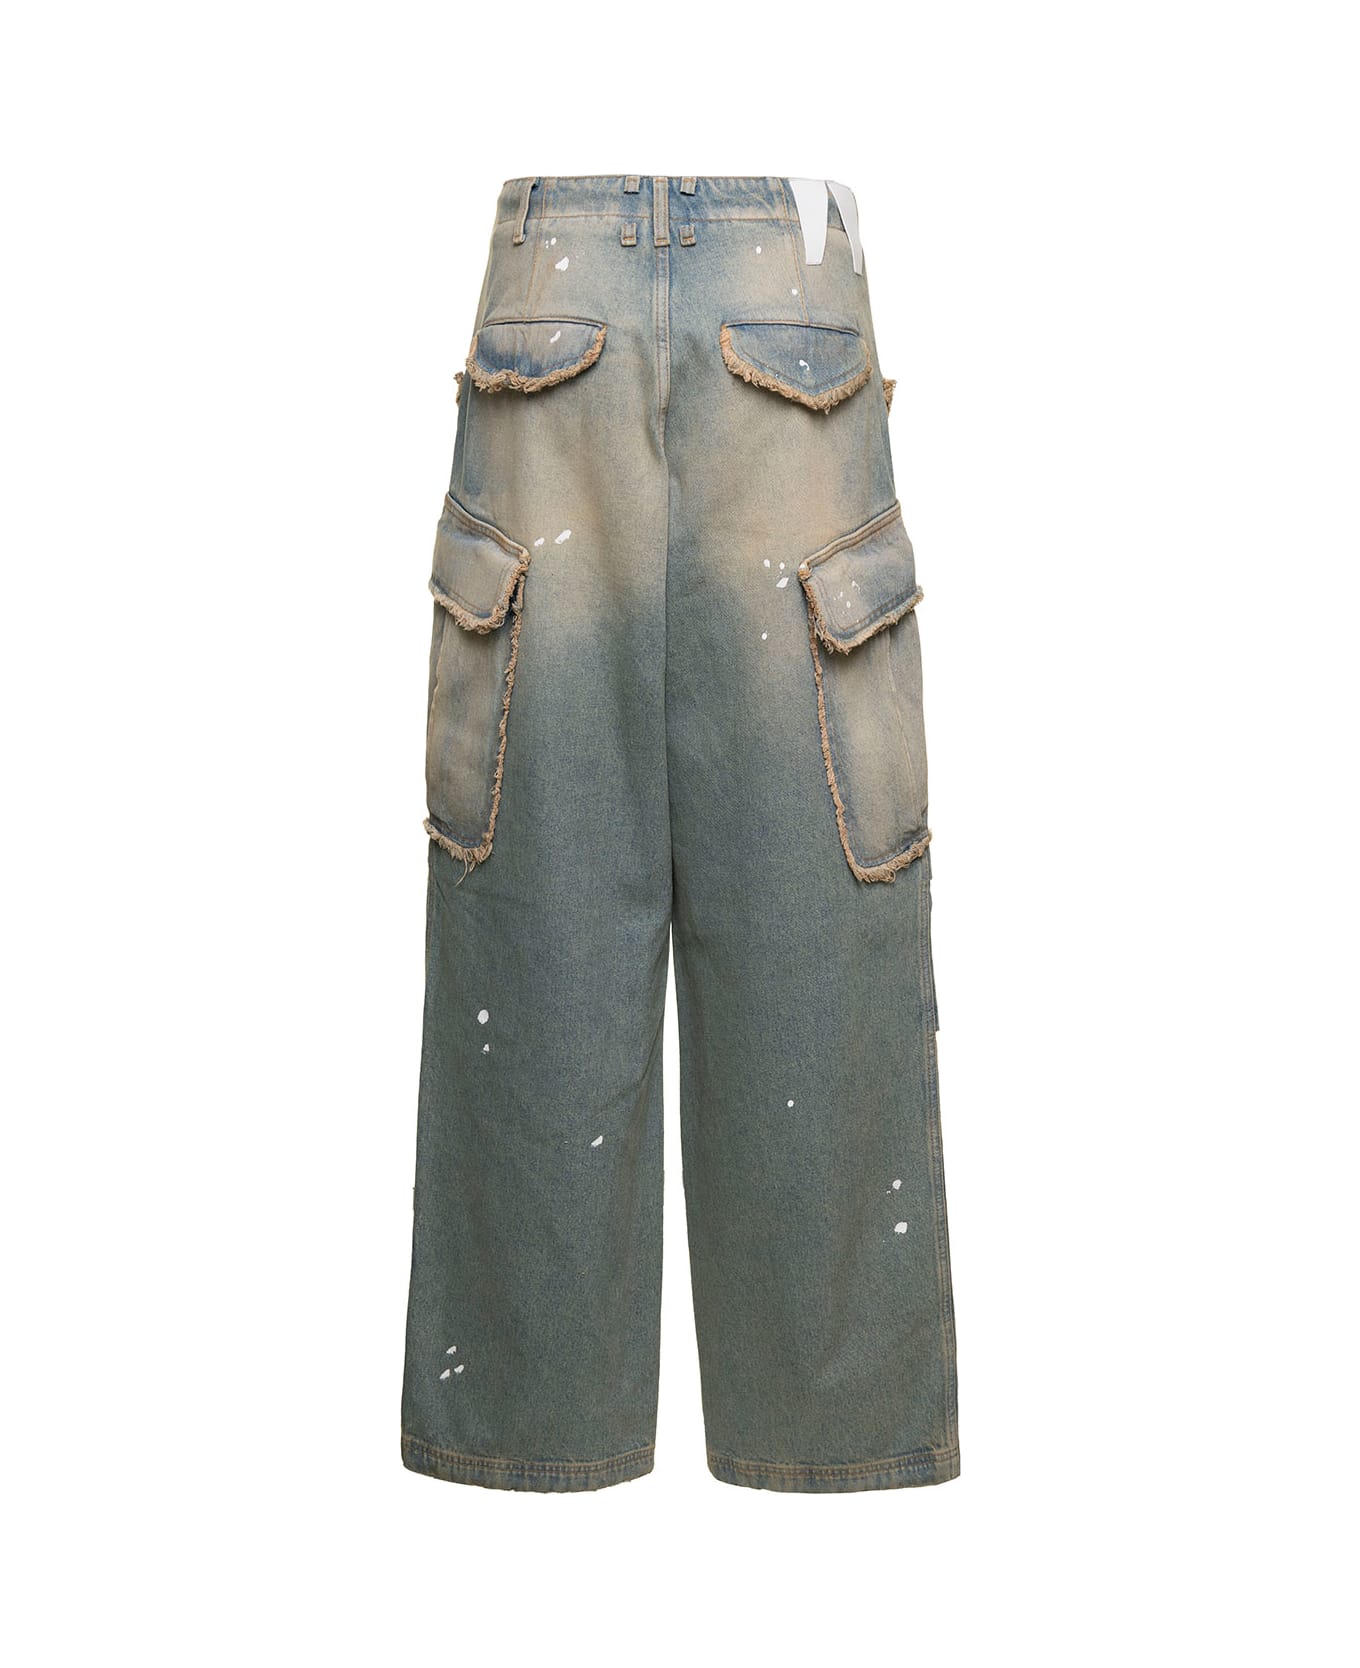 DARKPARK 'vivi' Light Blue Cargo Jeans With Bleached Effect And Paint Stains In Cotton Denim Woman - Light blue デニム